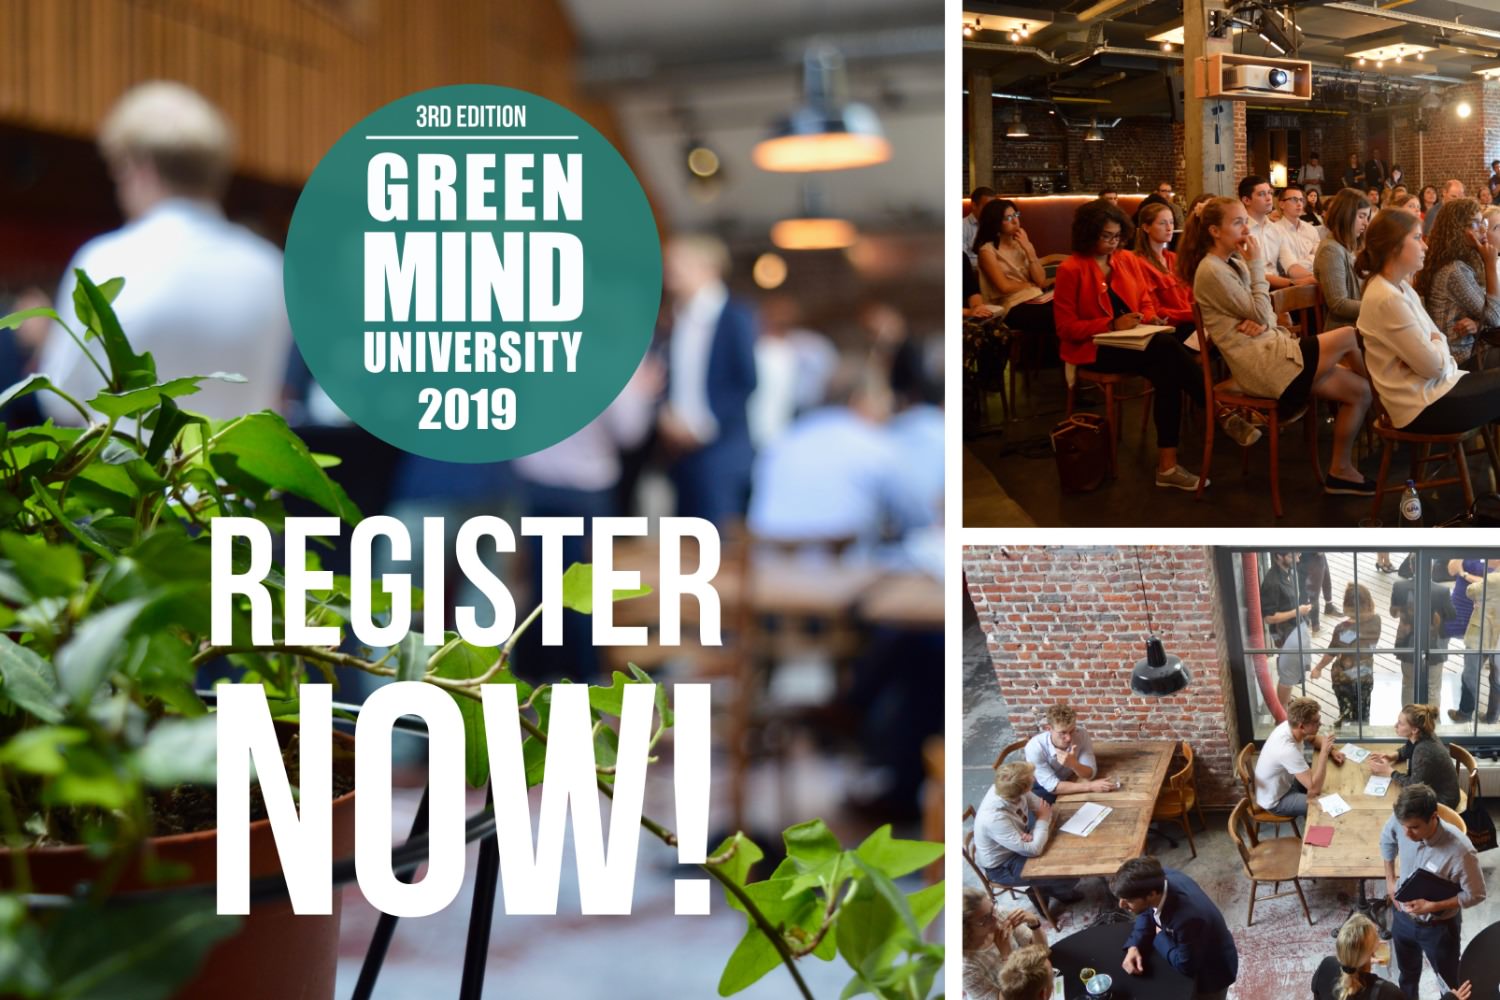 The Green Mind 2019